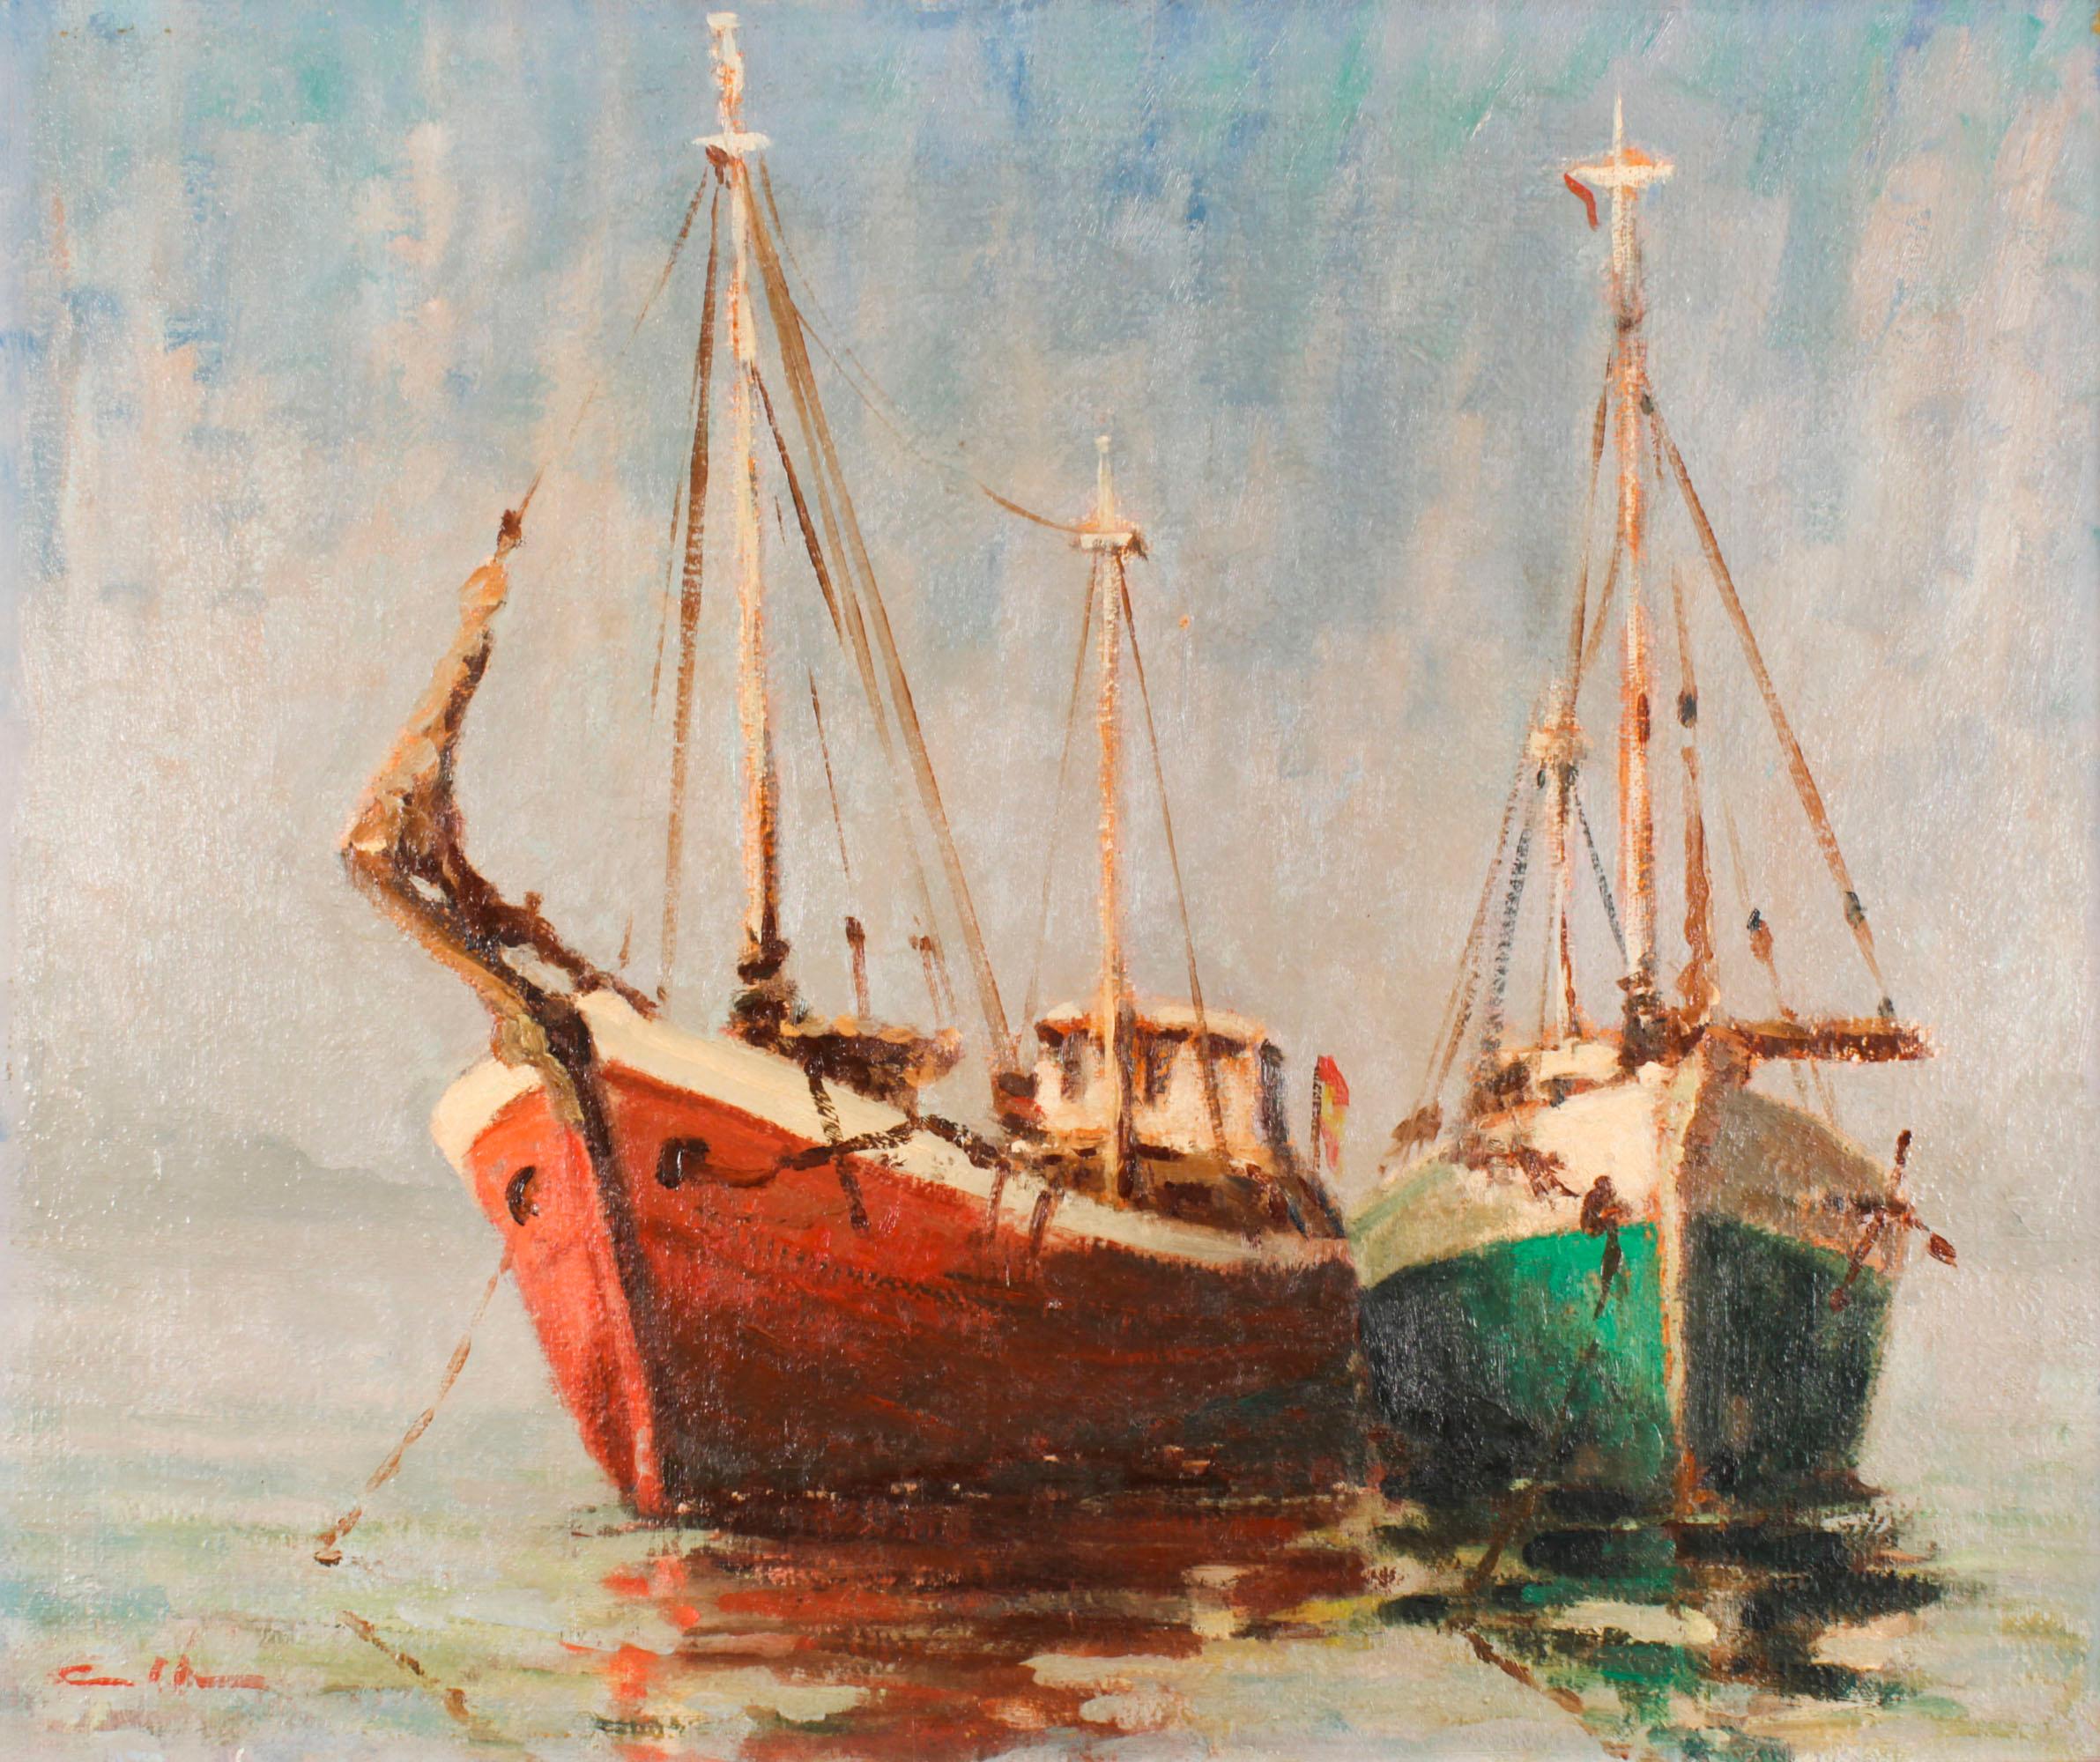 Vintage oil painting of  fishing boats titled Spanish Traders by Harold Edward Collin (1936-1973) circa 1960 in date.

The Impressionist painting freatures a pair of fishing boats one painted red and the other blue anchored in calm waters on the